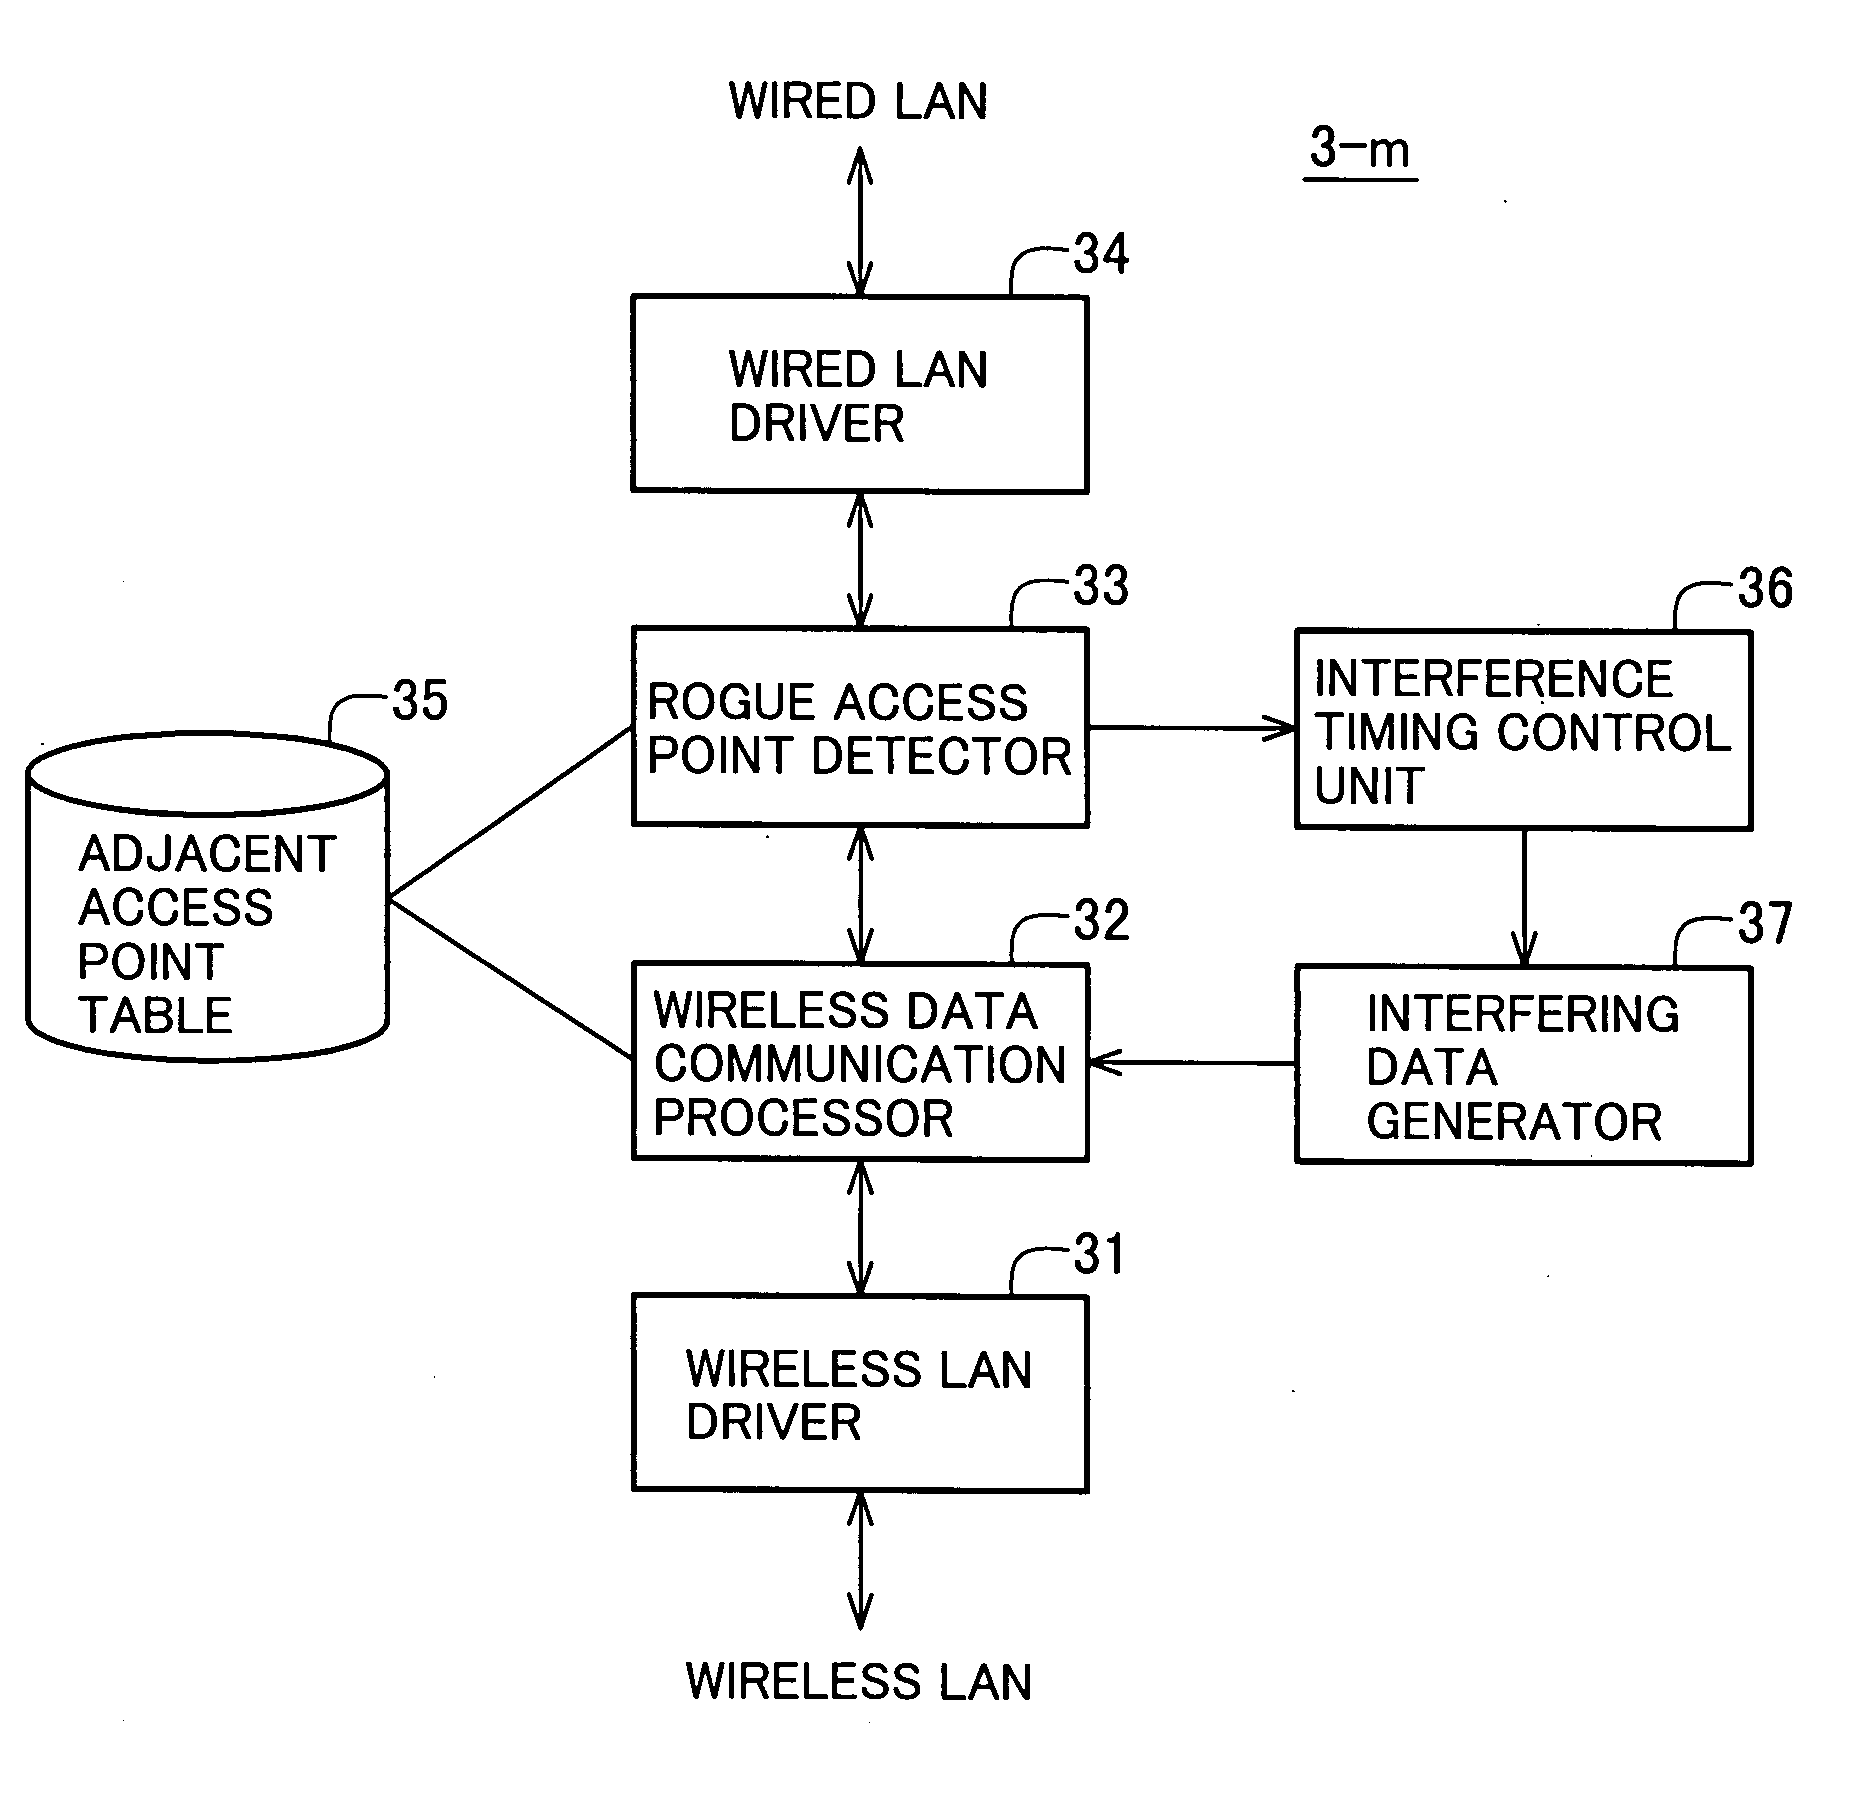 Wireless LAN system, access point, and method for preventing connection to a rogue access point